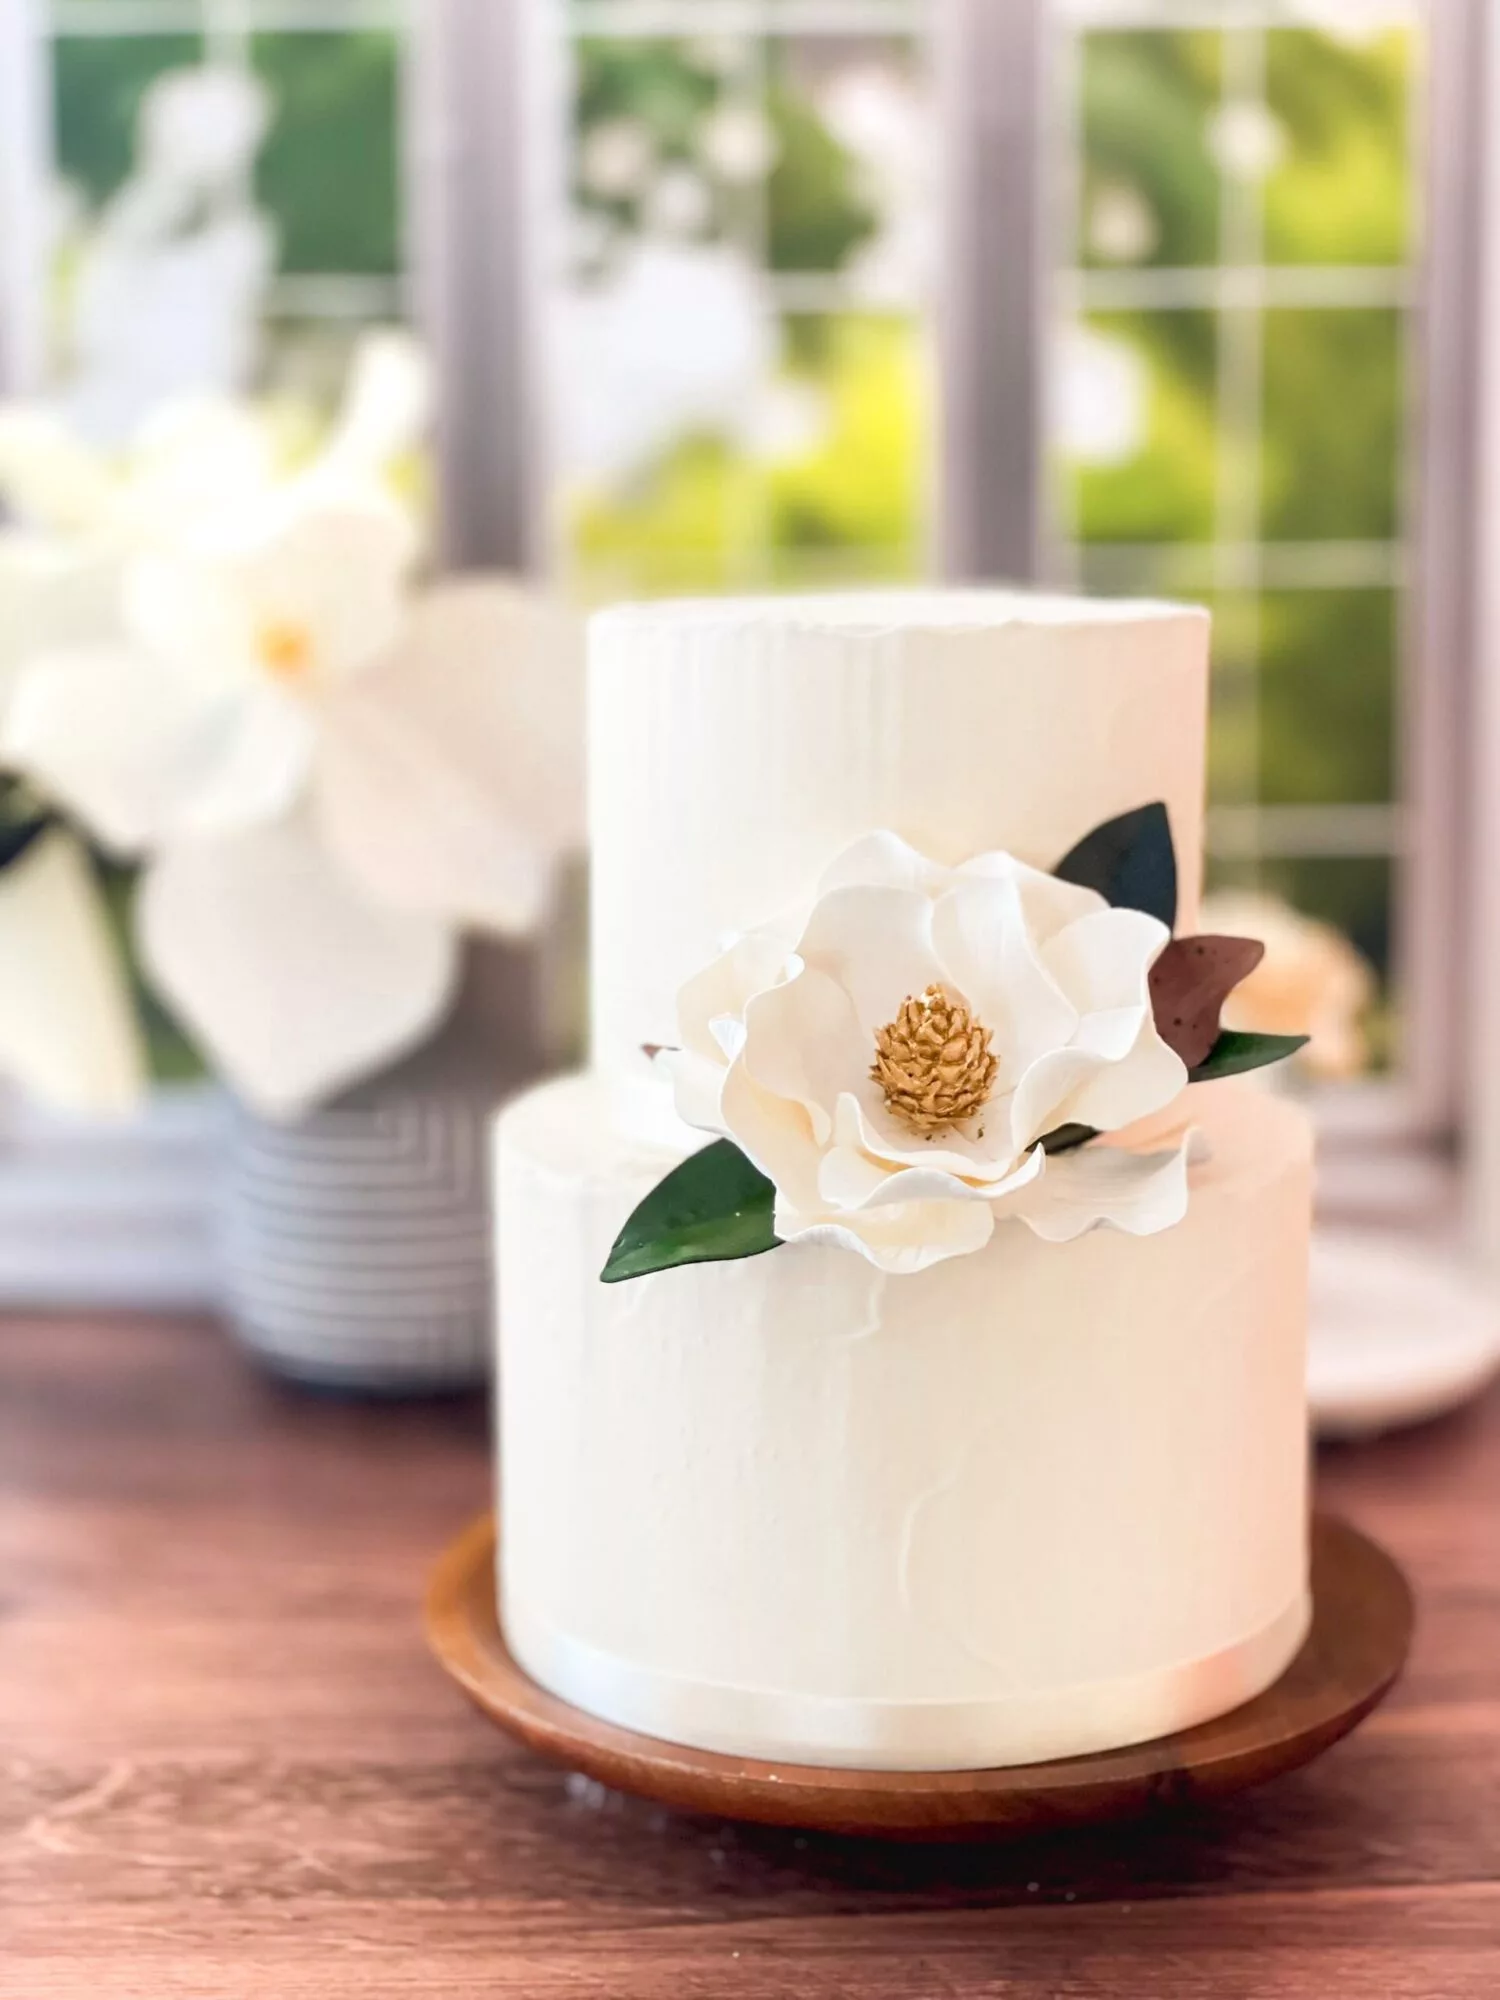 A magnolia sugar flower styled on a two tier cake